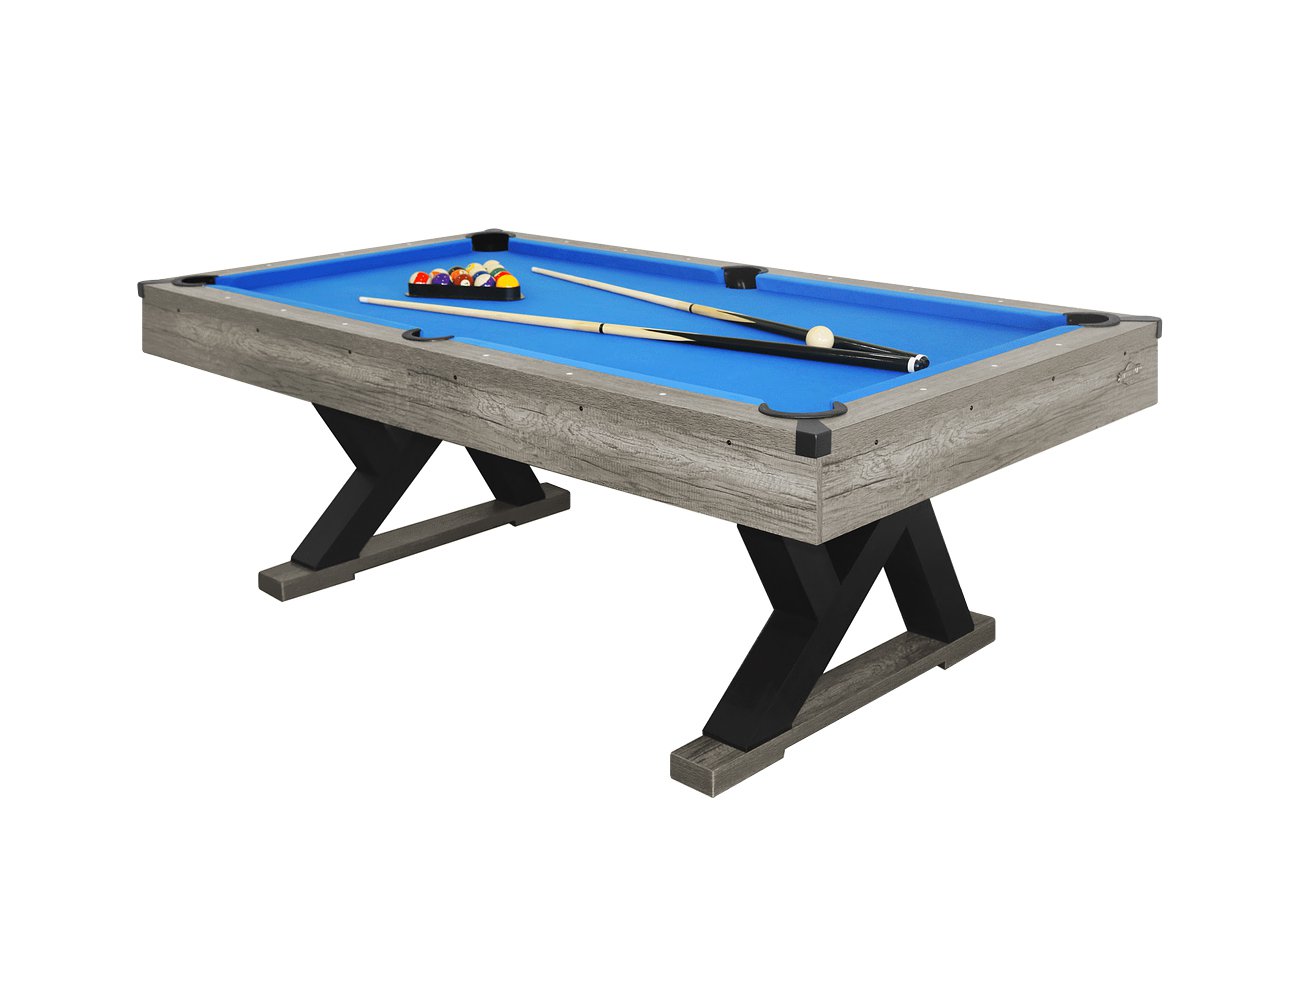 Pool Table with Accessories